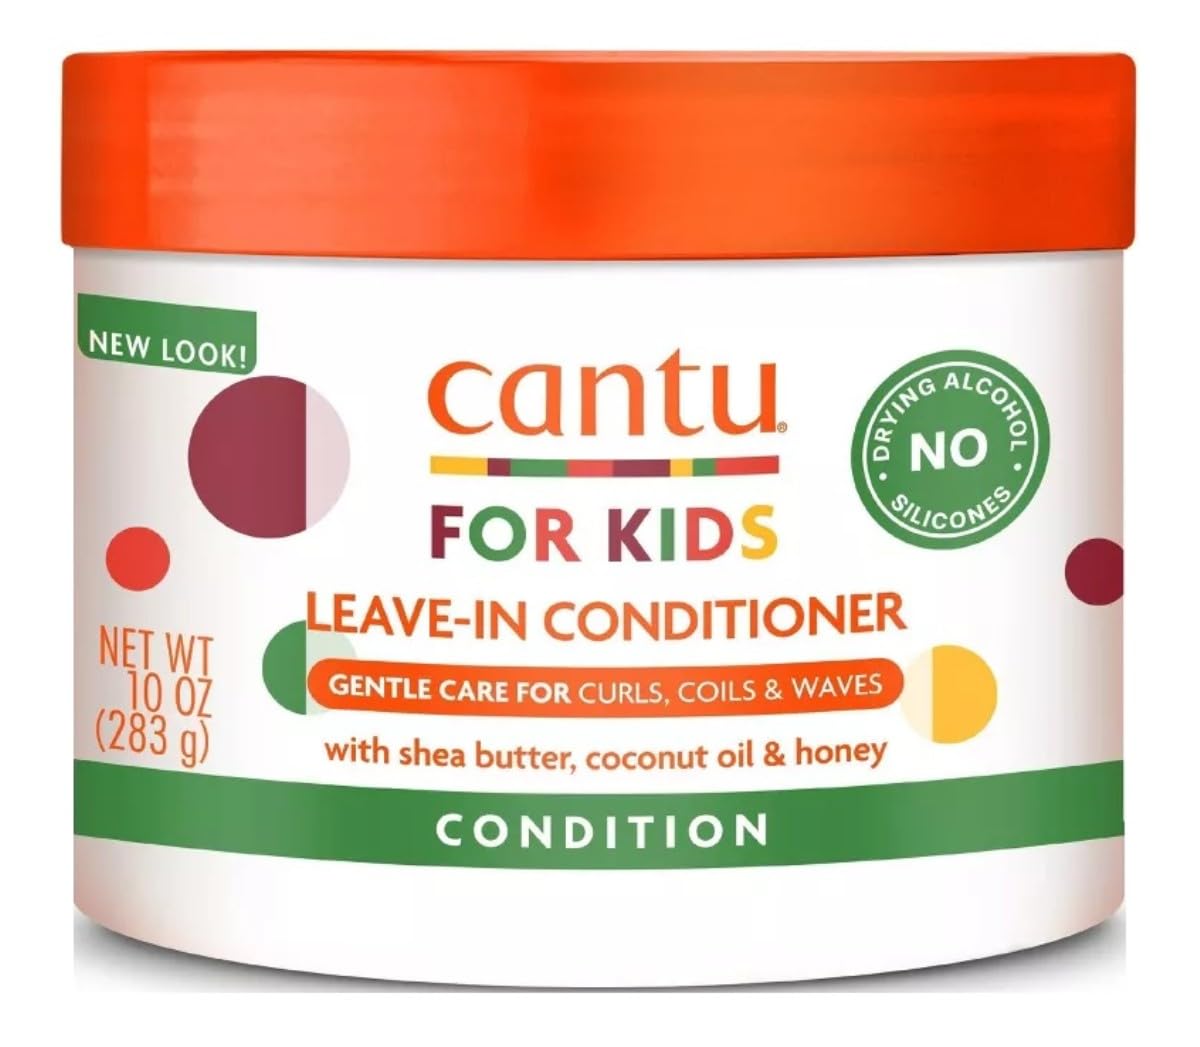 CANTU Care for Kids Leave-In Conditioner | No Sulphate, Silicone, Parabens 283g - Afro Hair Boutique